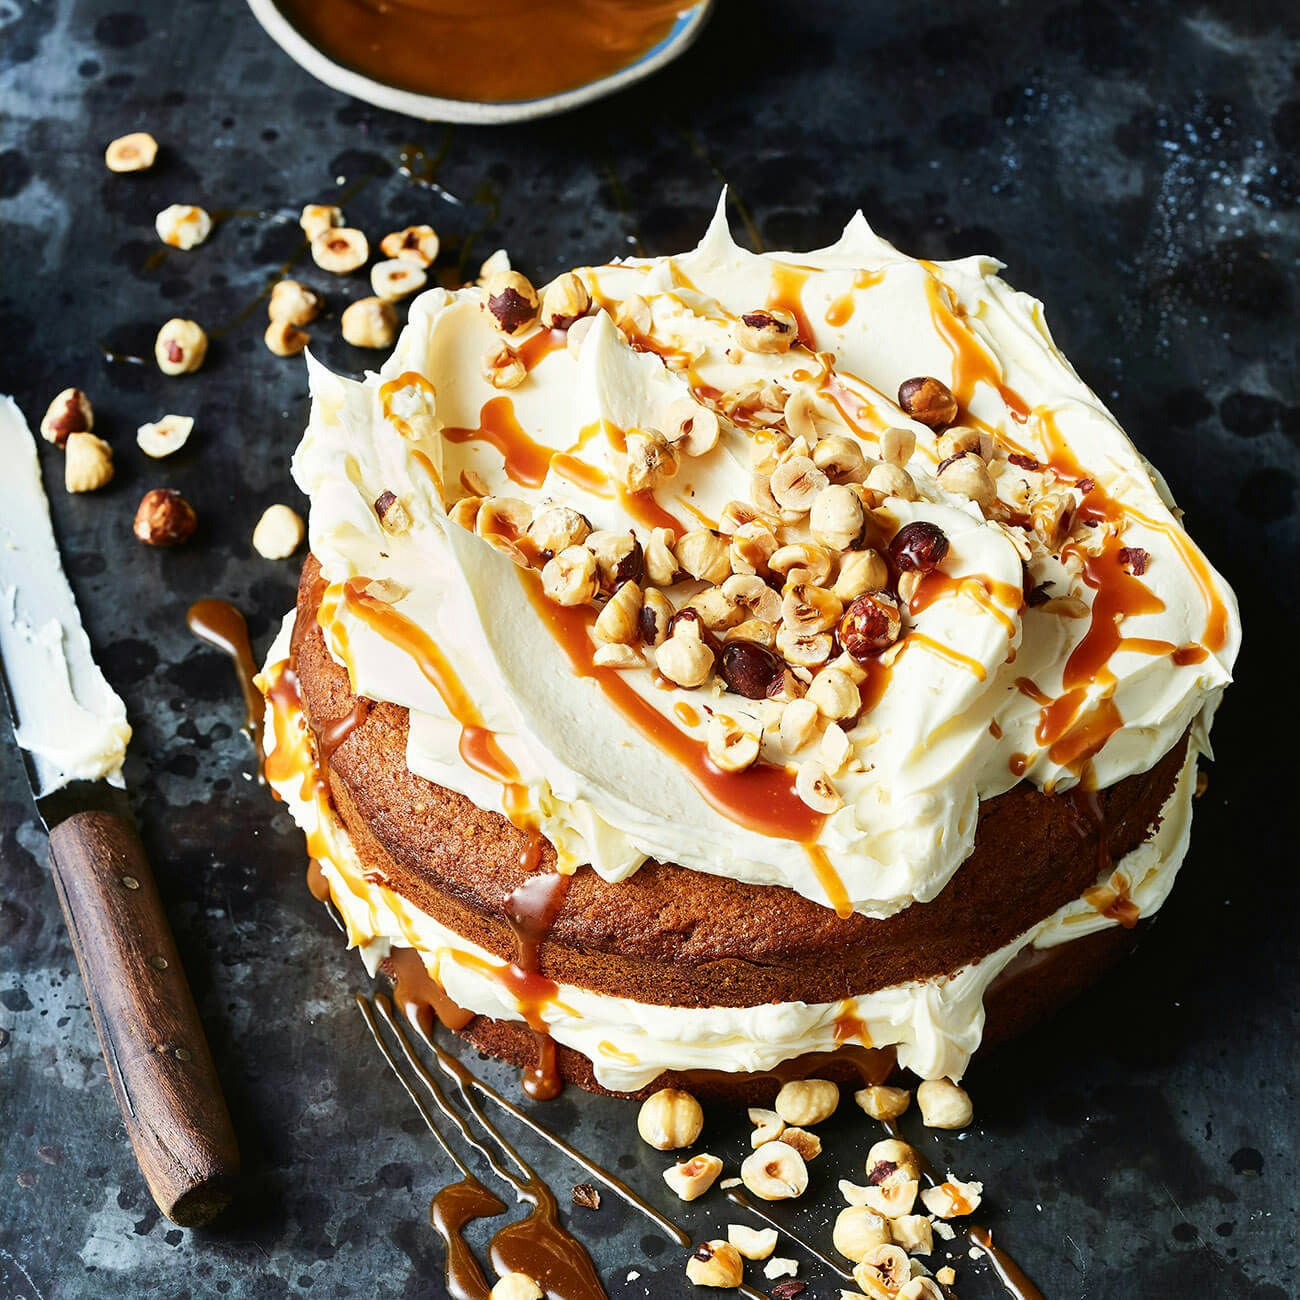 Blog Event: Invitation to a Coffee plus a Whisky Chocolate Caramel Cake -  Jenny is baking